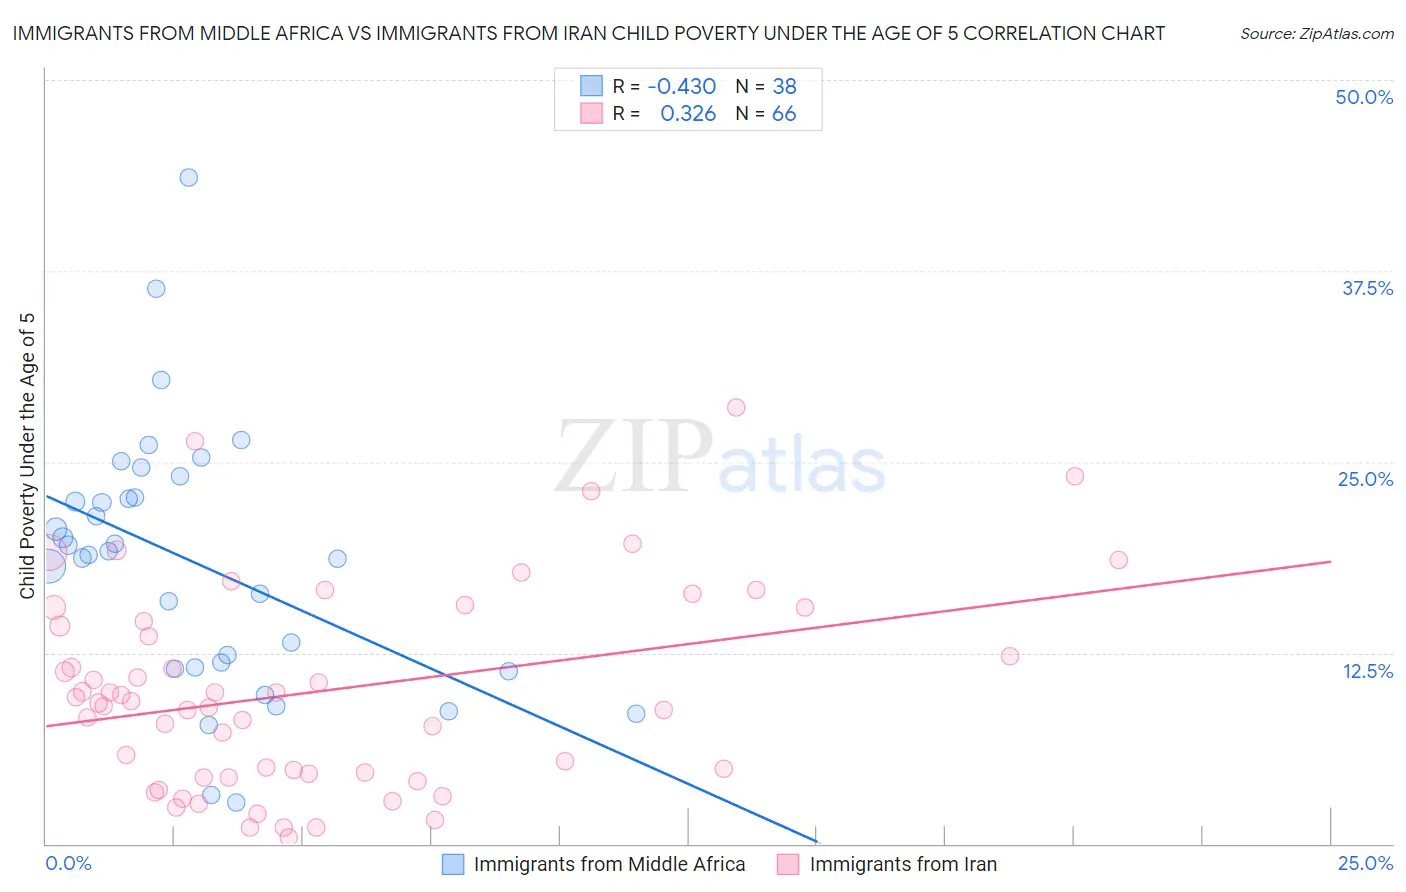 Immigrants from Middle Africa vs Immigrants from Iran Child Poverty Under the Age of 5